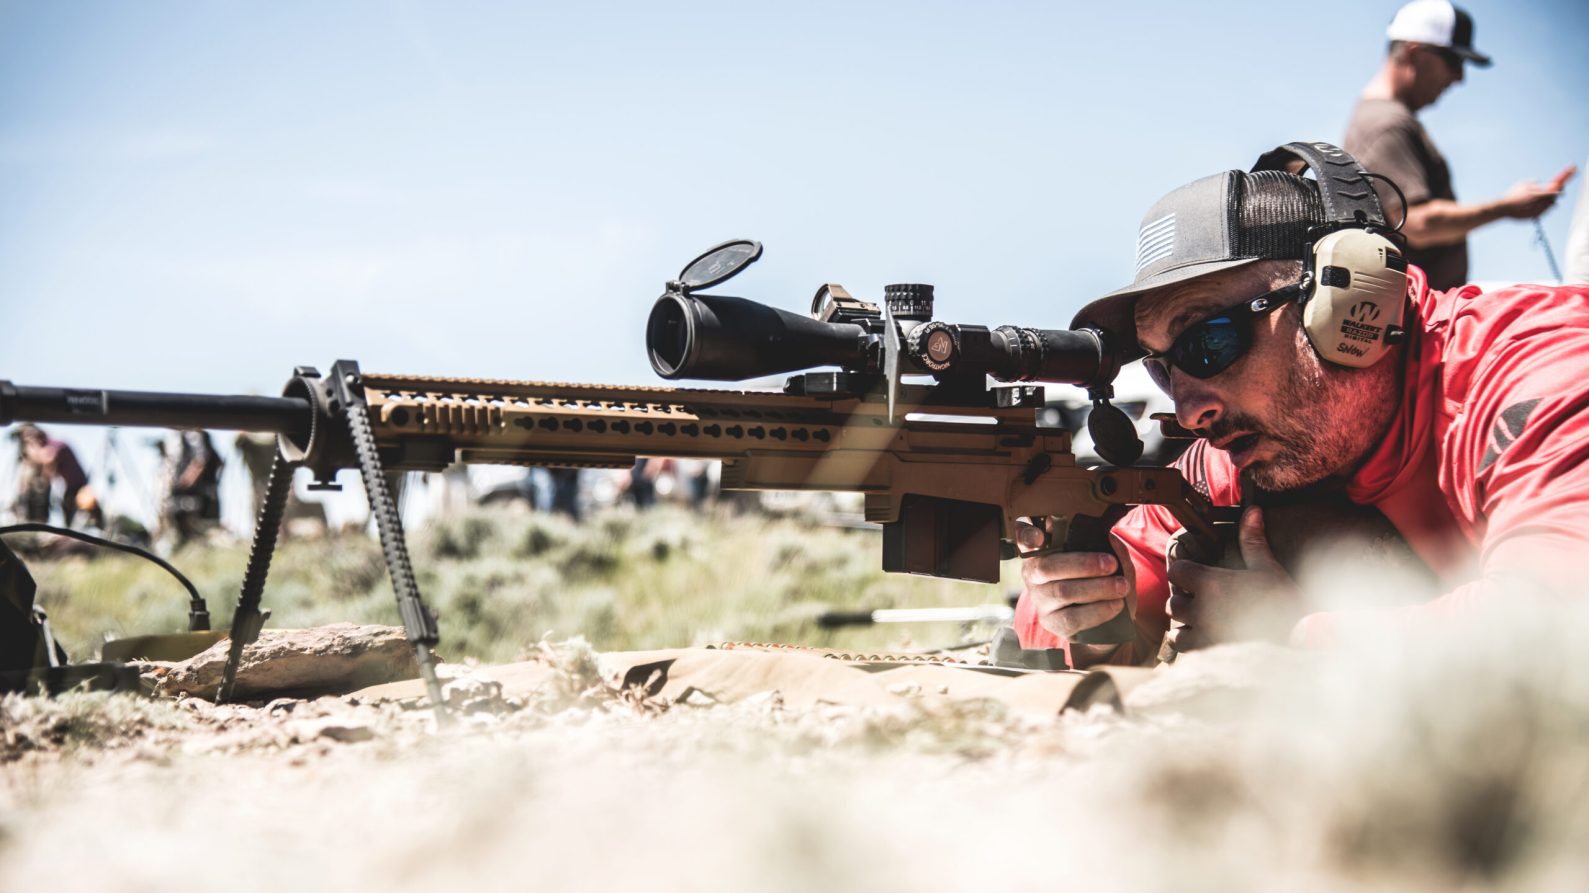 The author shoots one of the best long range rifles.